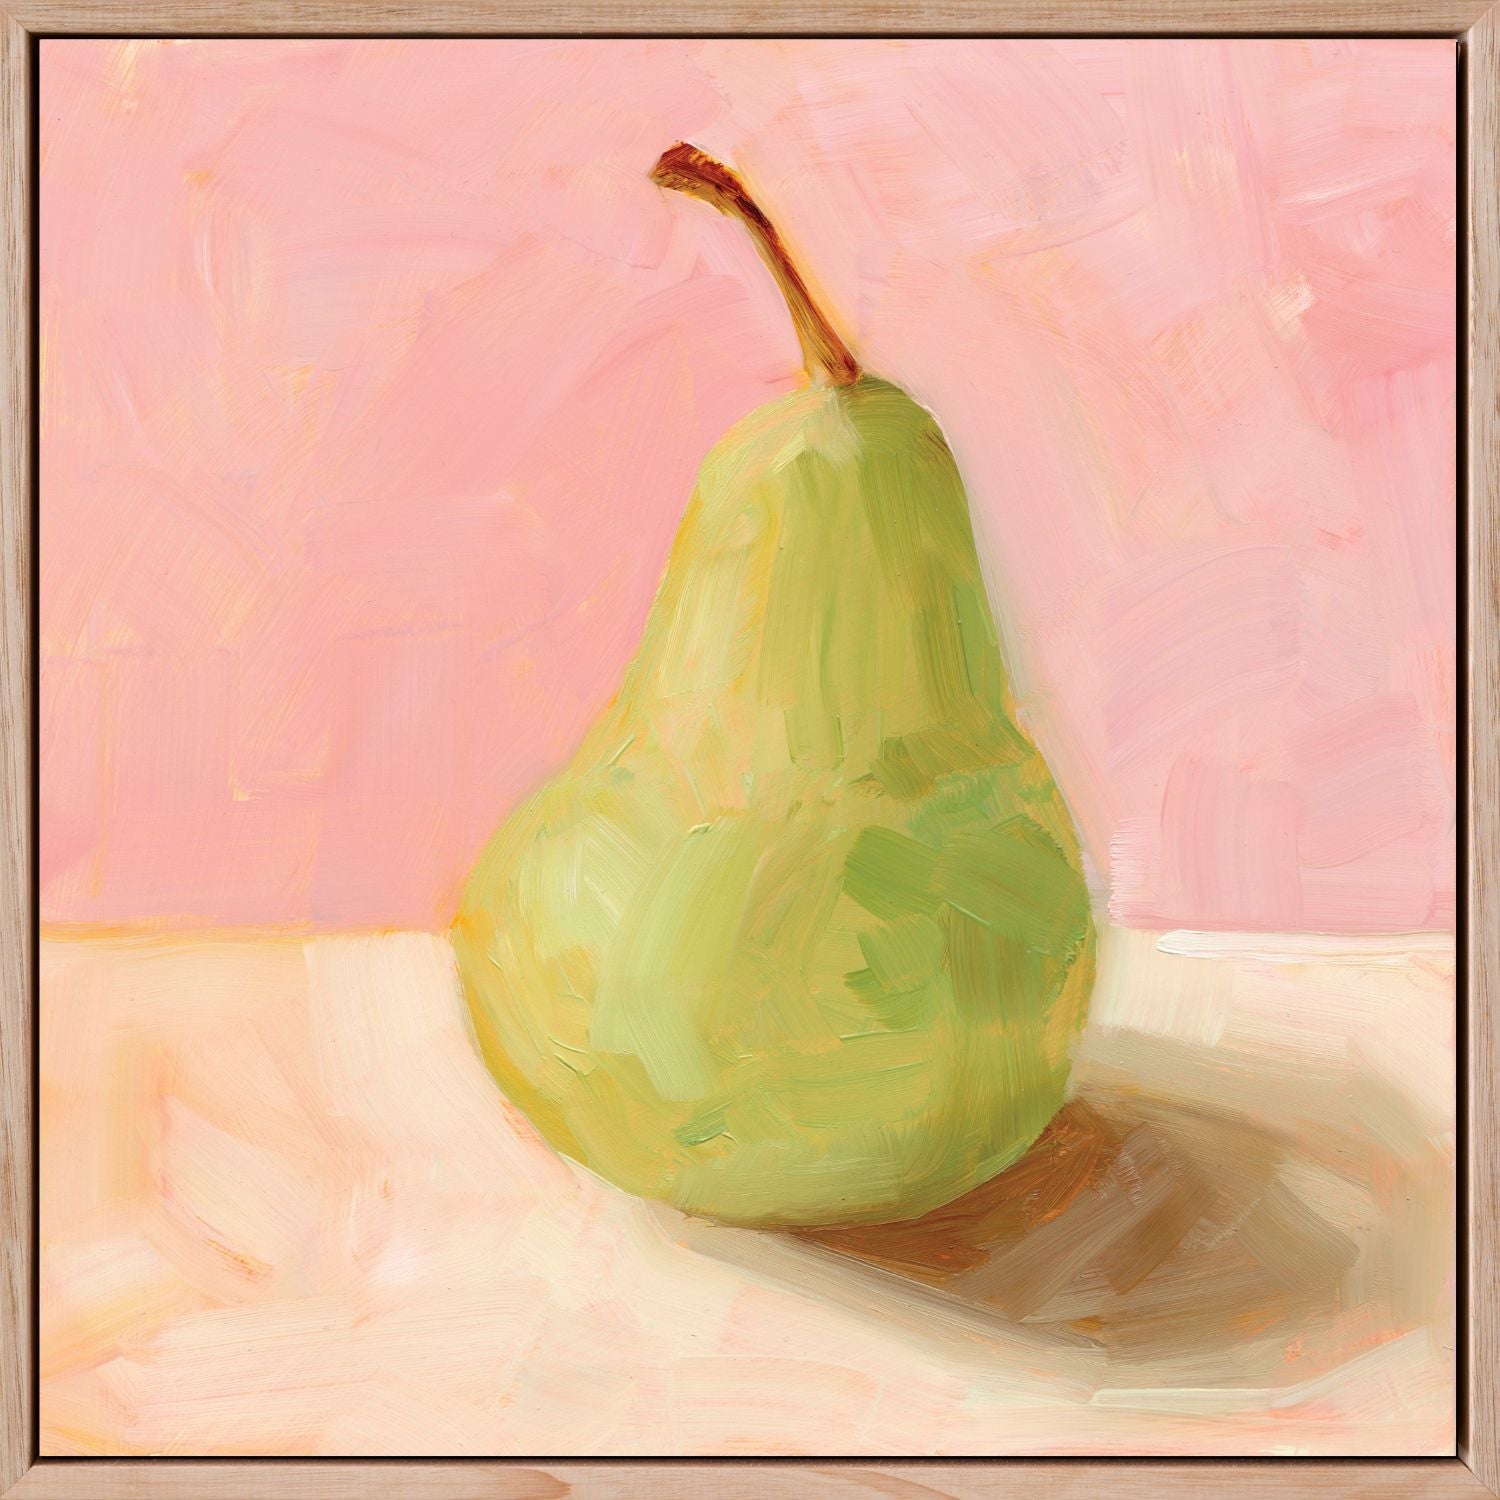 fine art print of a colorful and modern original oil painting of a soft green pear on a pink and cream background with shadows